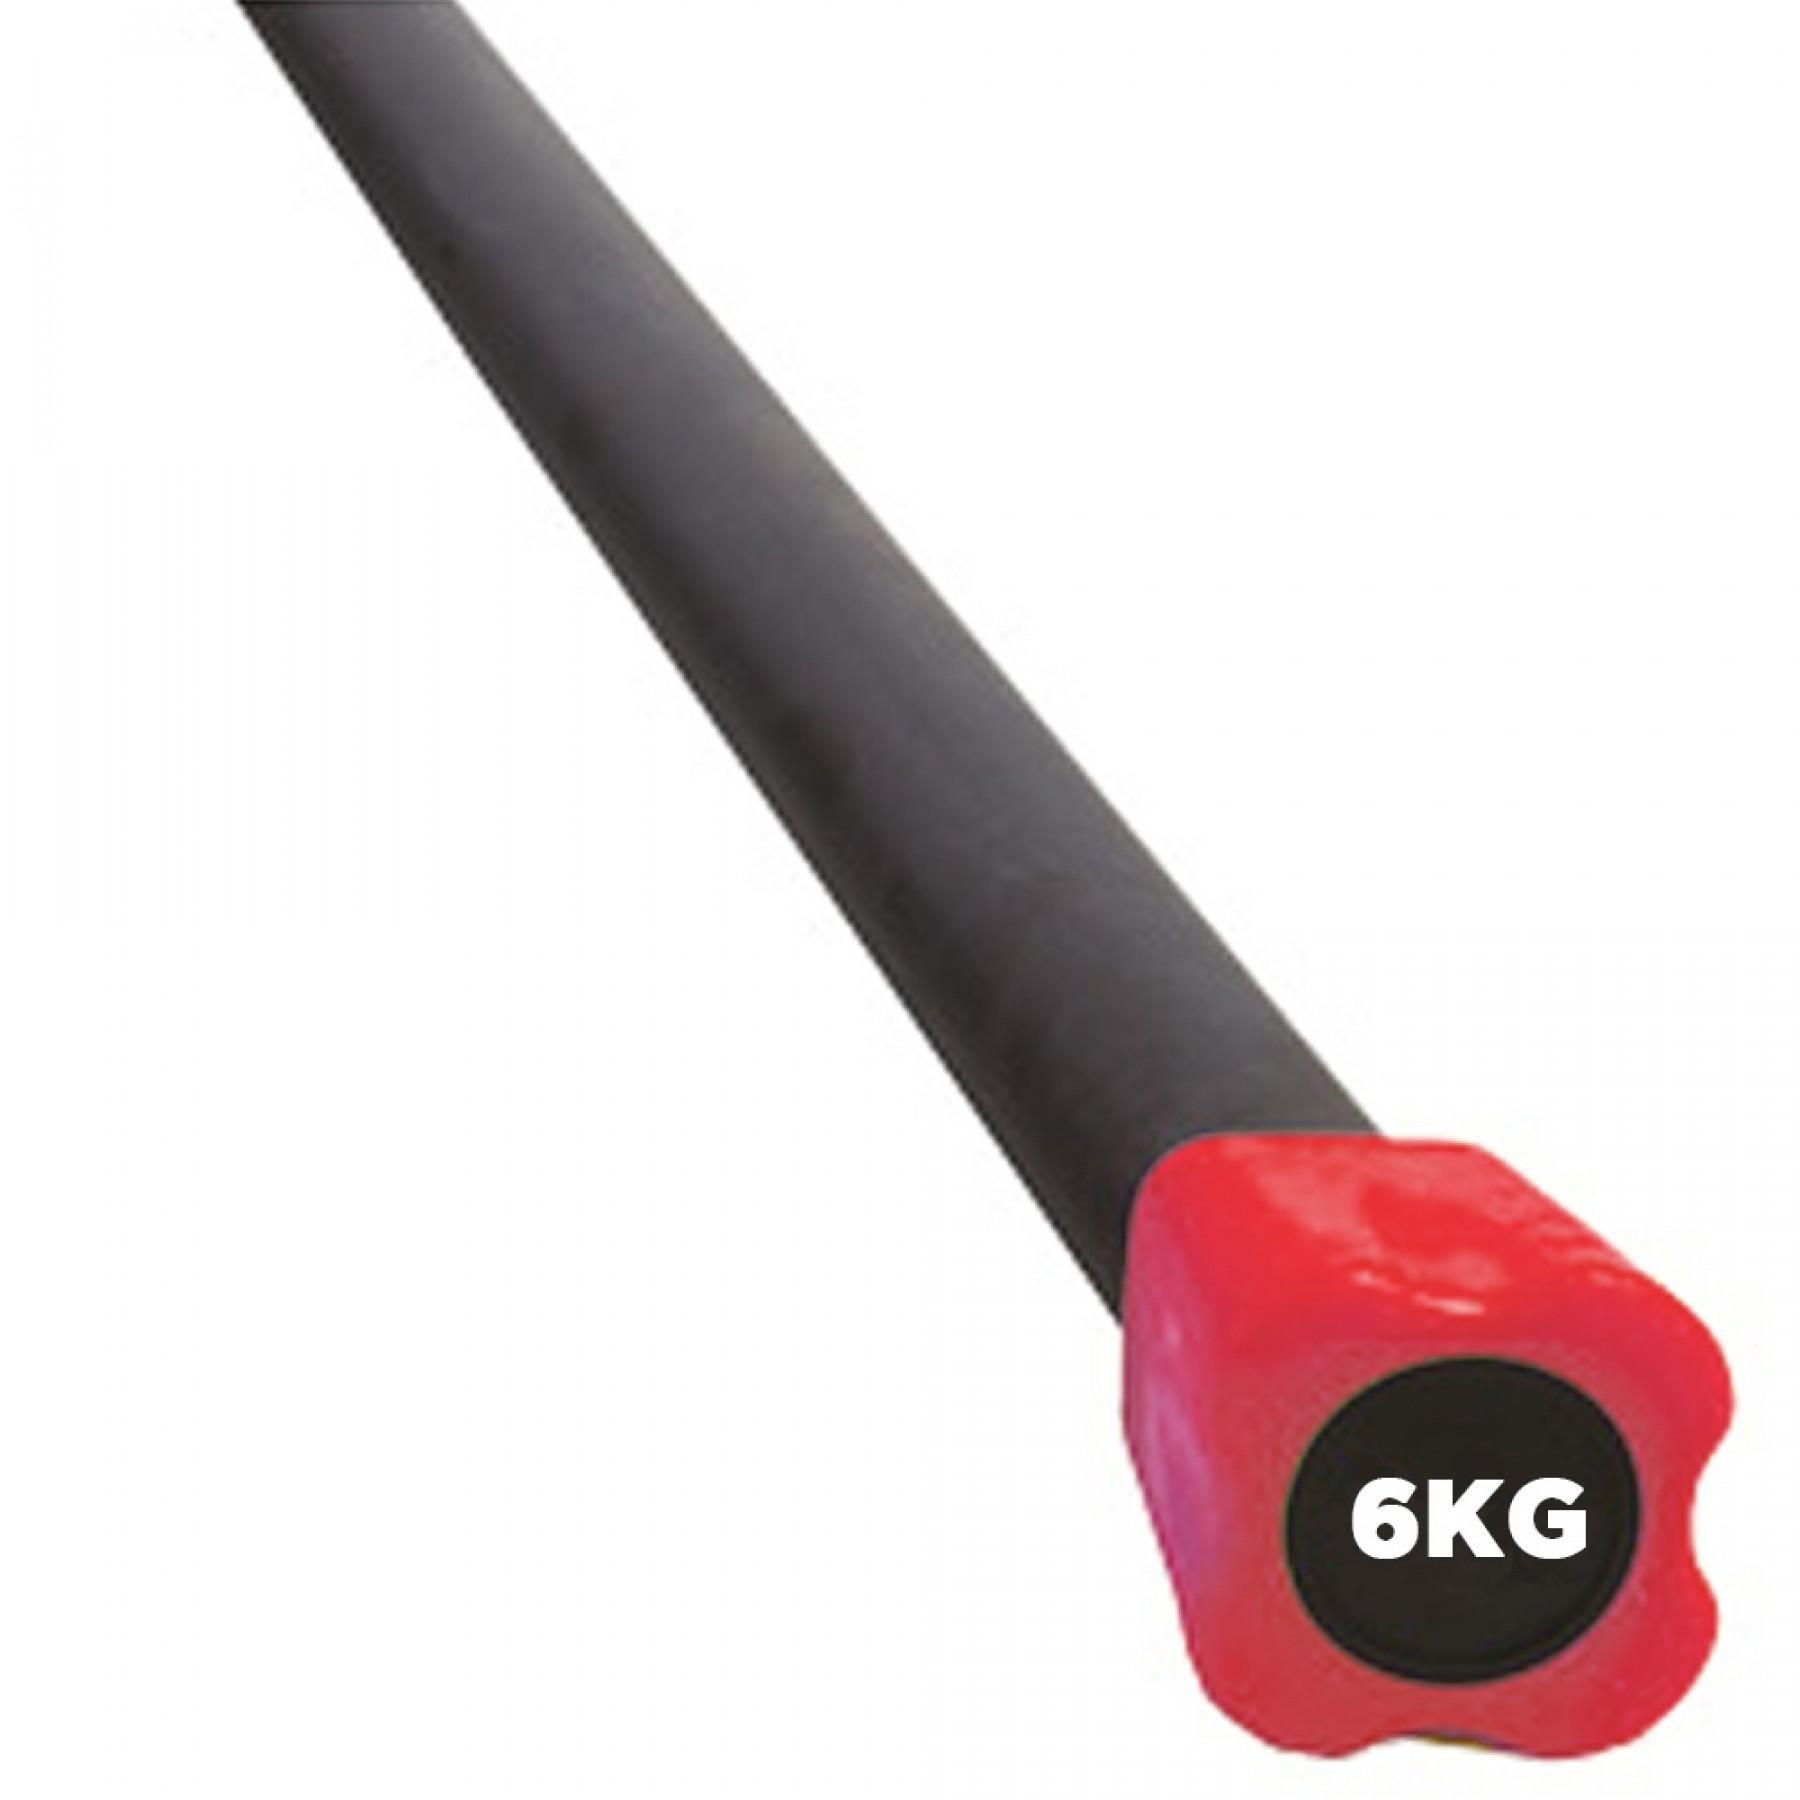 Weighted bar Leader Fit 26mm 6kg